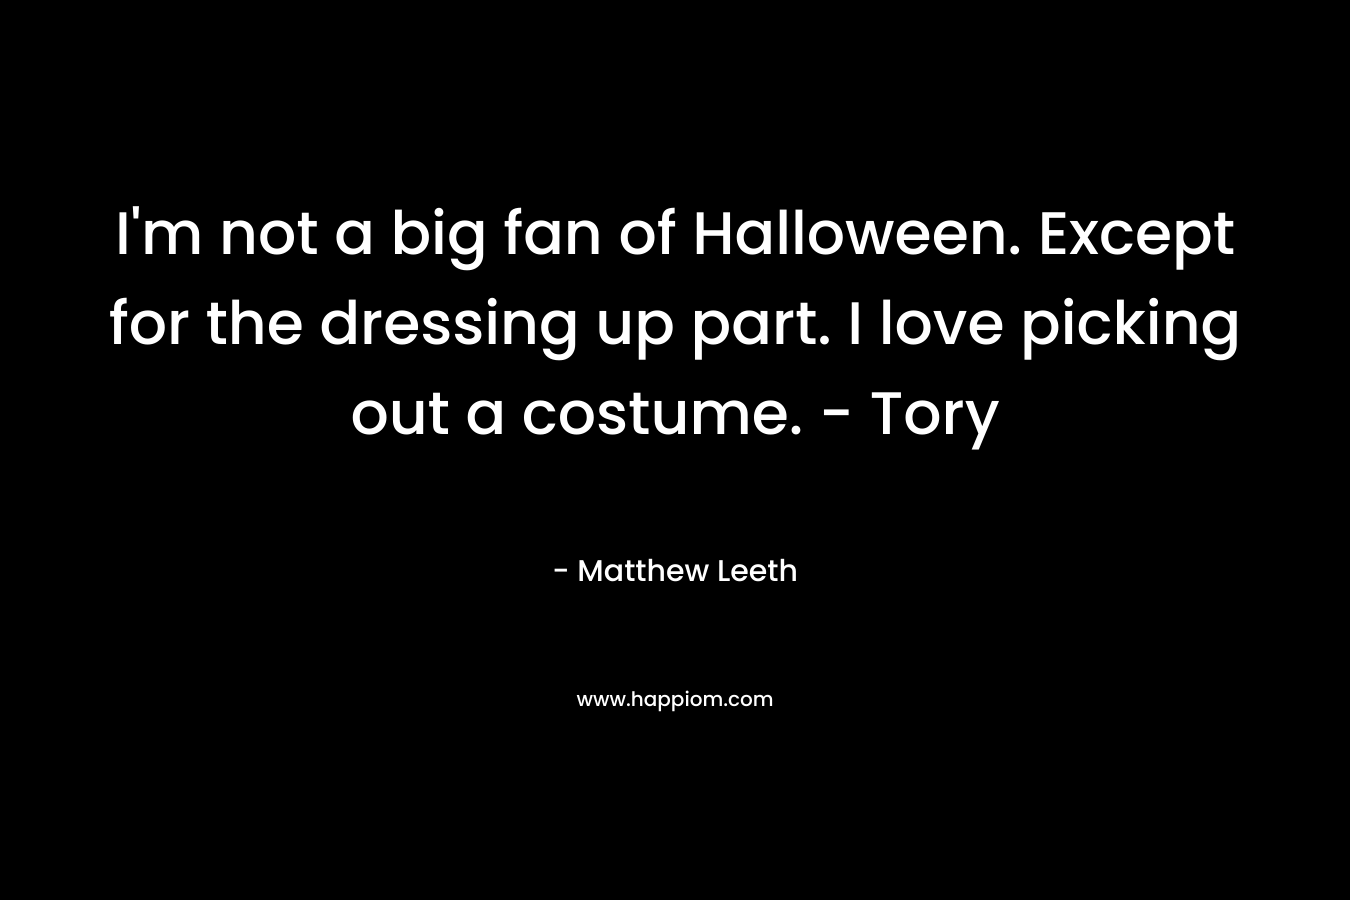 I'm not a big fan of Halloween. Except for the dressing up part. I love picking out a costume. - Tory